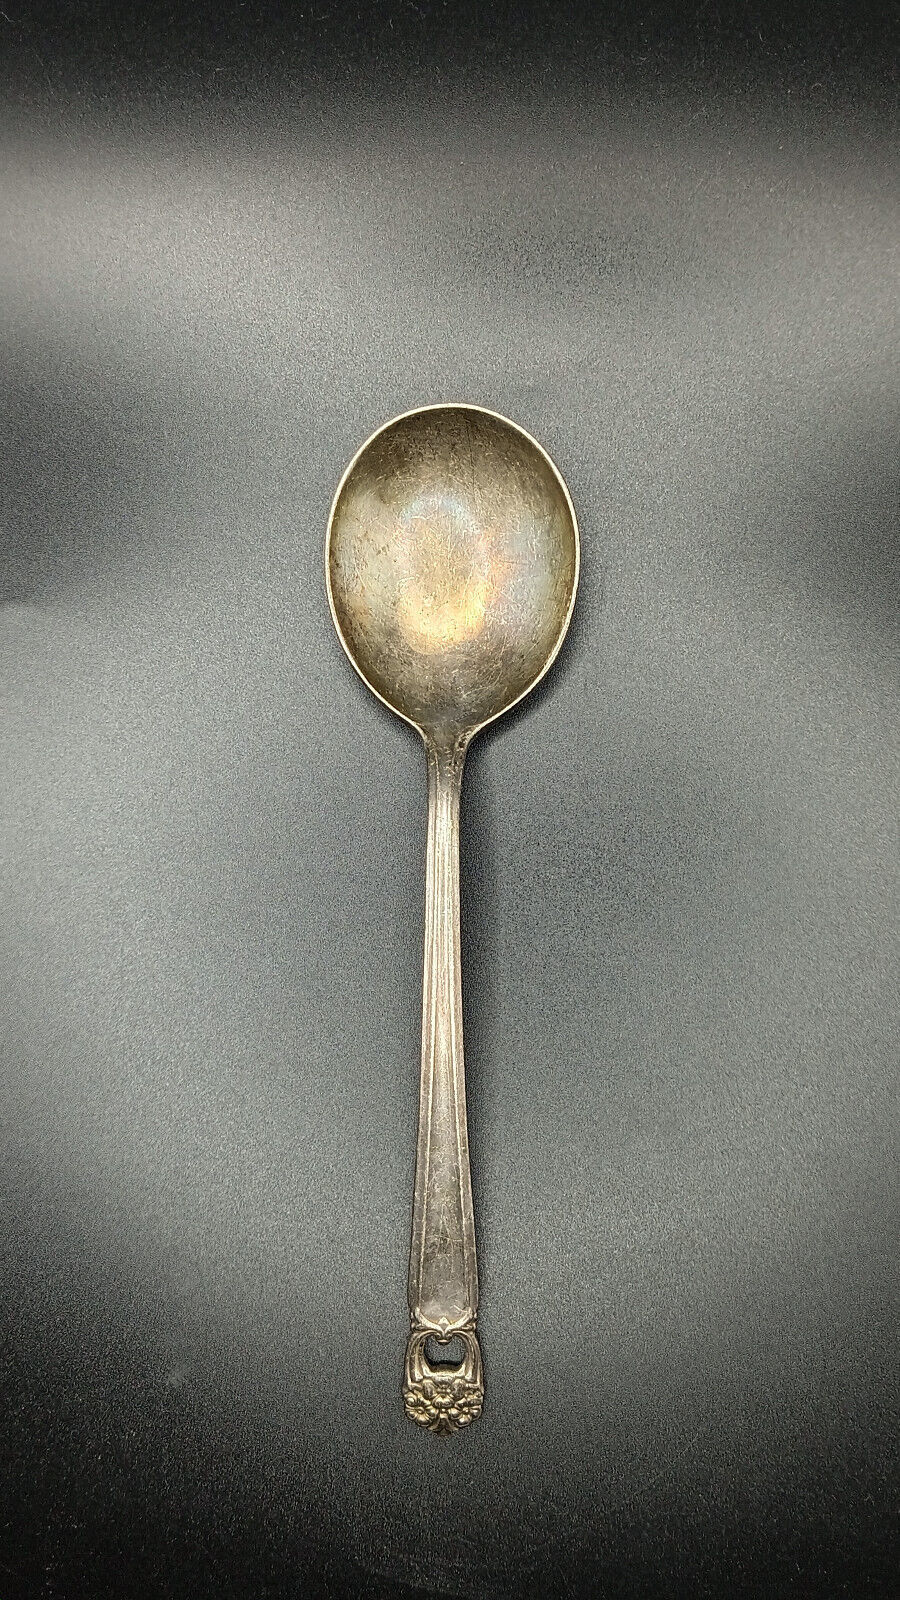 Vintage Silverware Round Bowl Soup Spoon Gumbo Eternally Yours Silverplate 1941 - $22.00